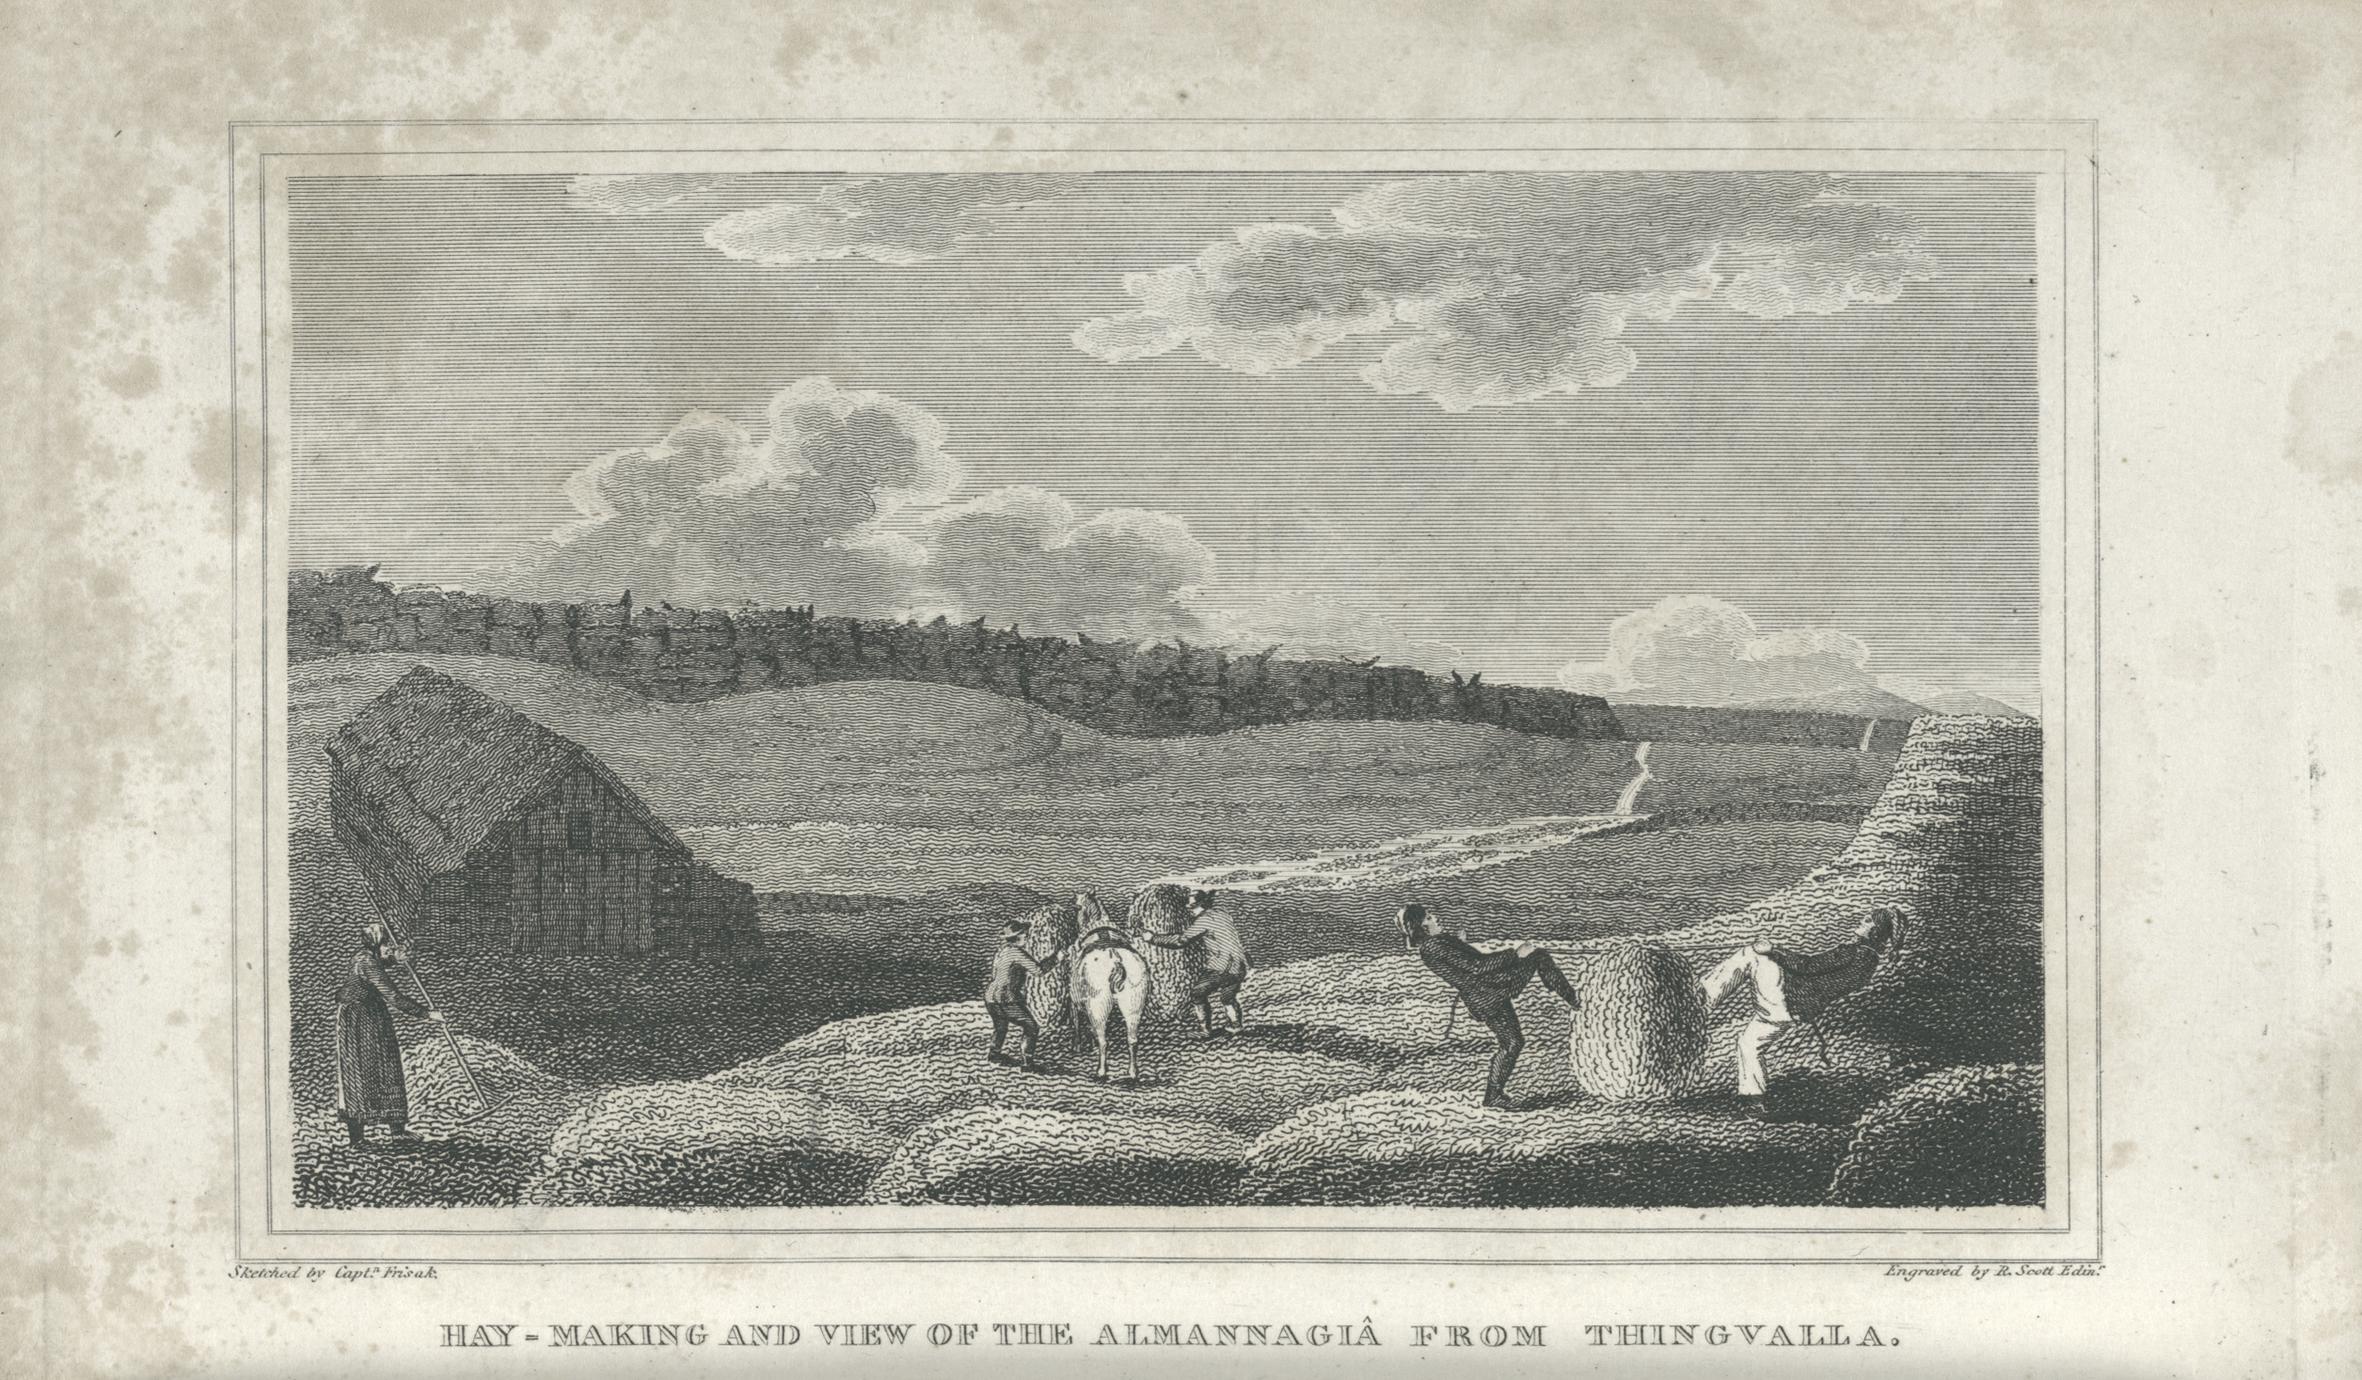 Engraving of farmers gathering hay, with Almannagjá in the background.